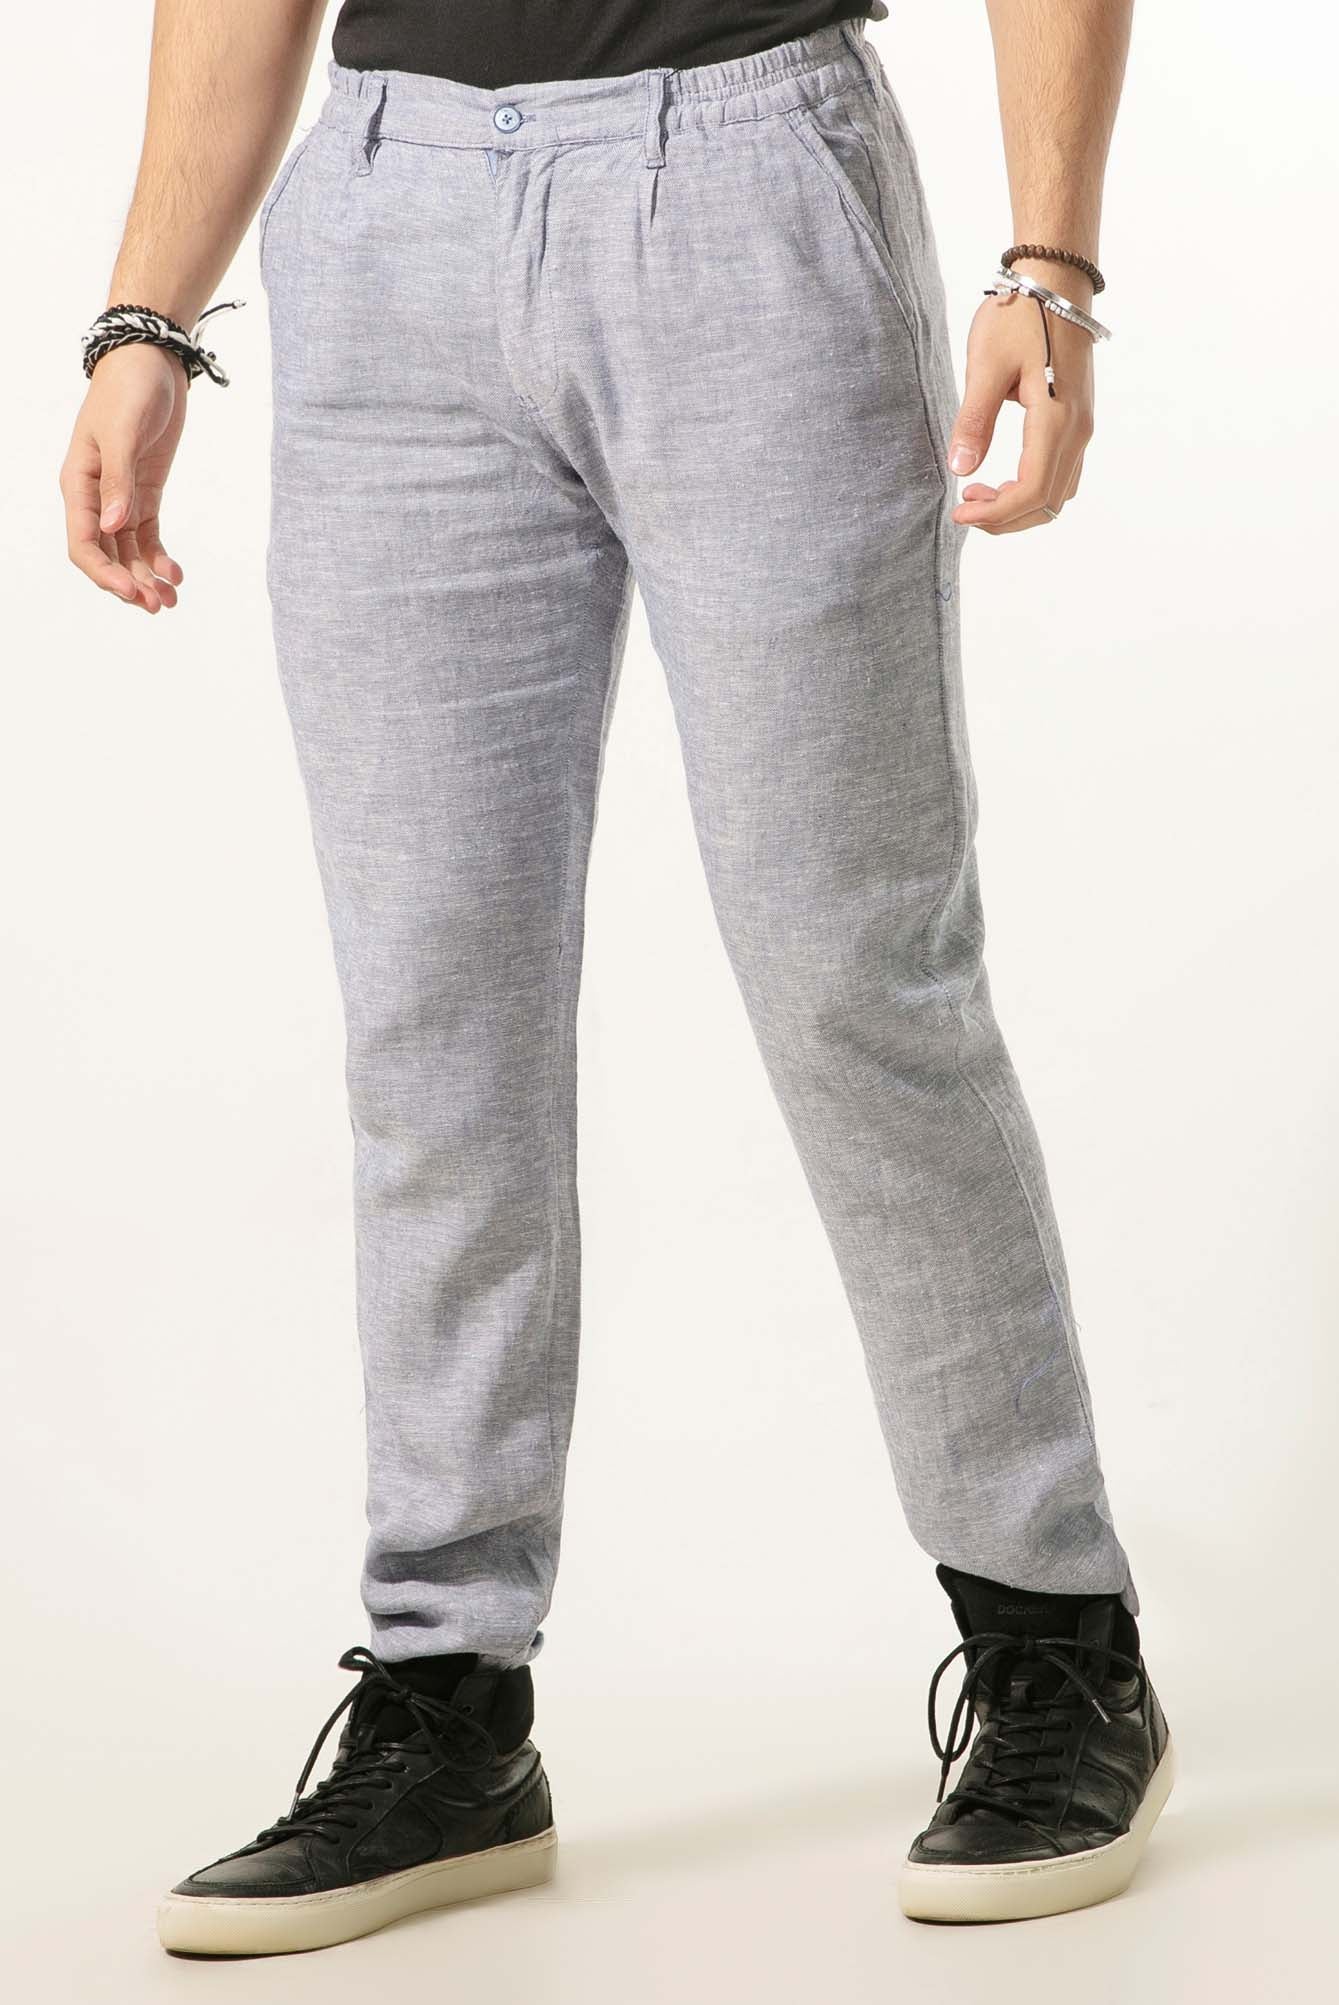 GTS-6302 PULL ON TROUSER NAVY